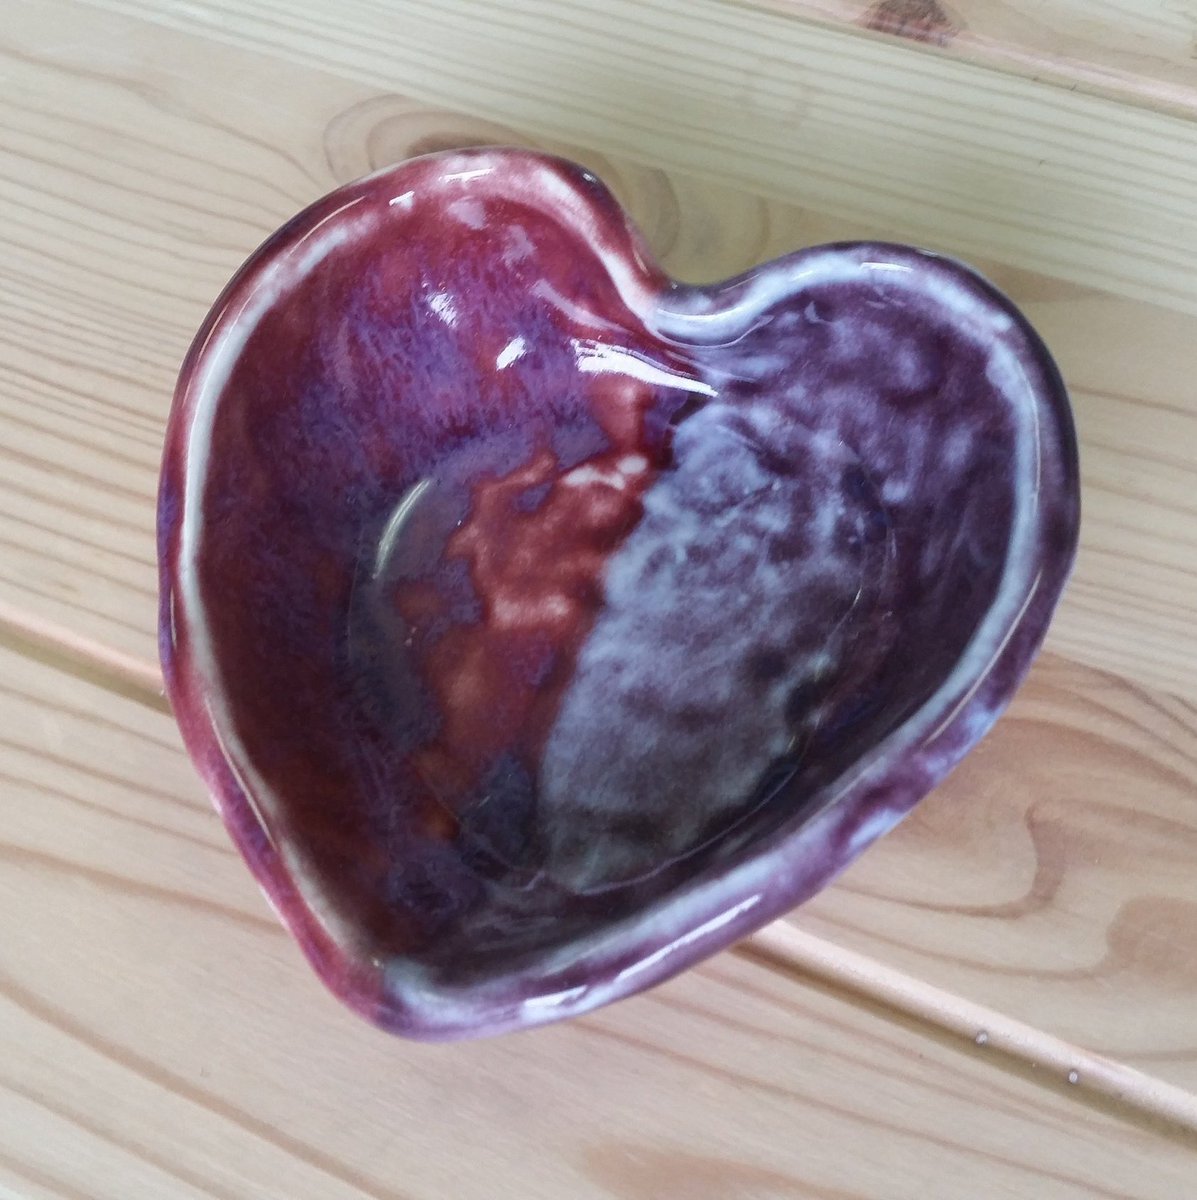 Thanks for the kind words! ★★★★★ 'Just as described. Beautiful work, I love it! Can’t wait to use it on my desk.' Pamela J. etsy.me/2Wm1KFD #etsy #jewelry #pink #purple #ceramic #heartdish #heartshape #handmade #pinchpot #fivestarreview